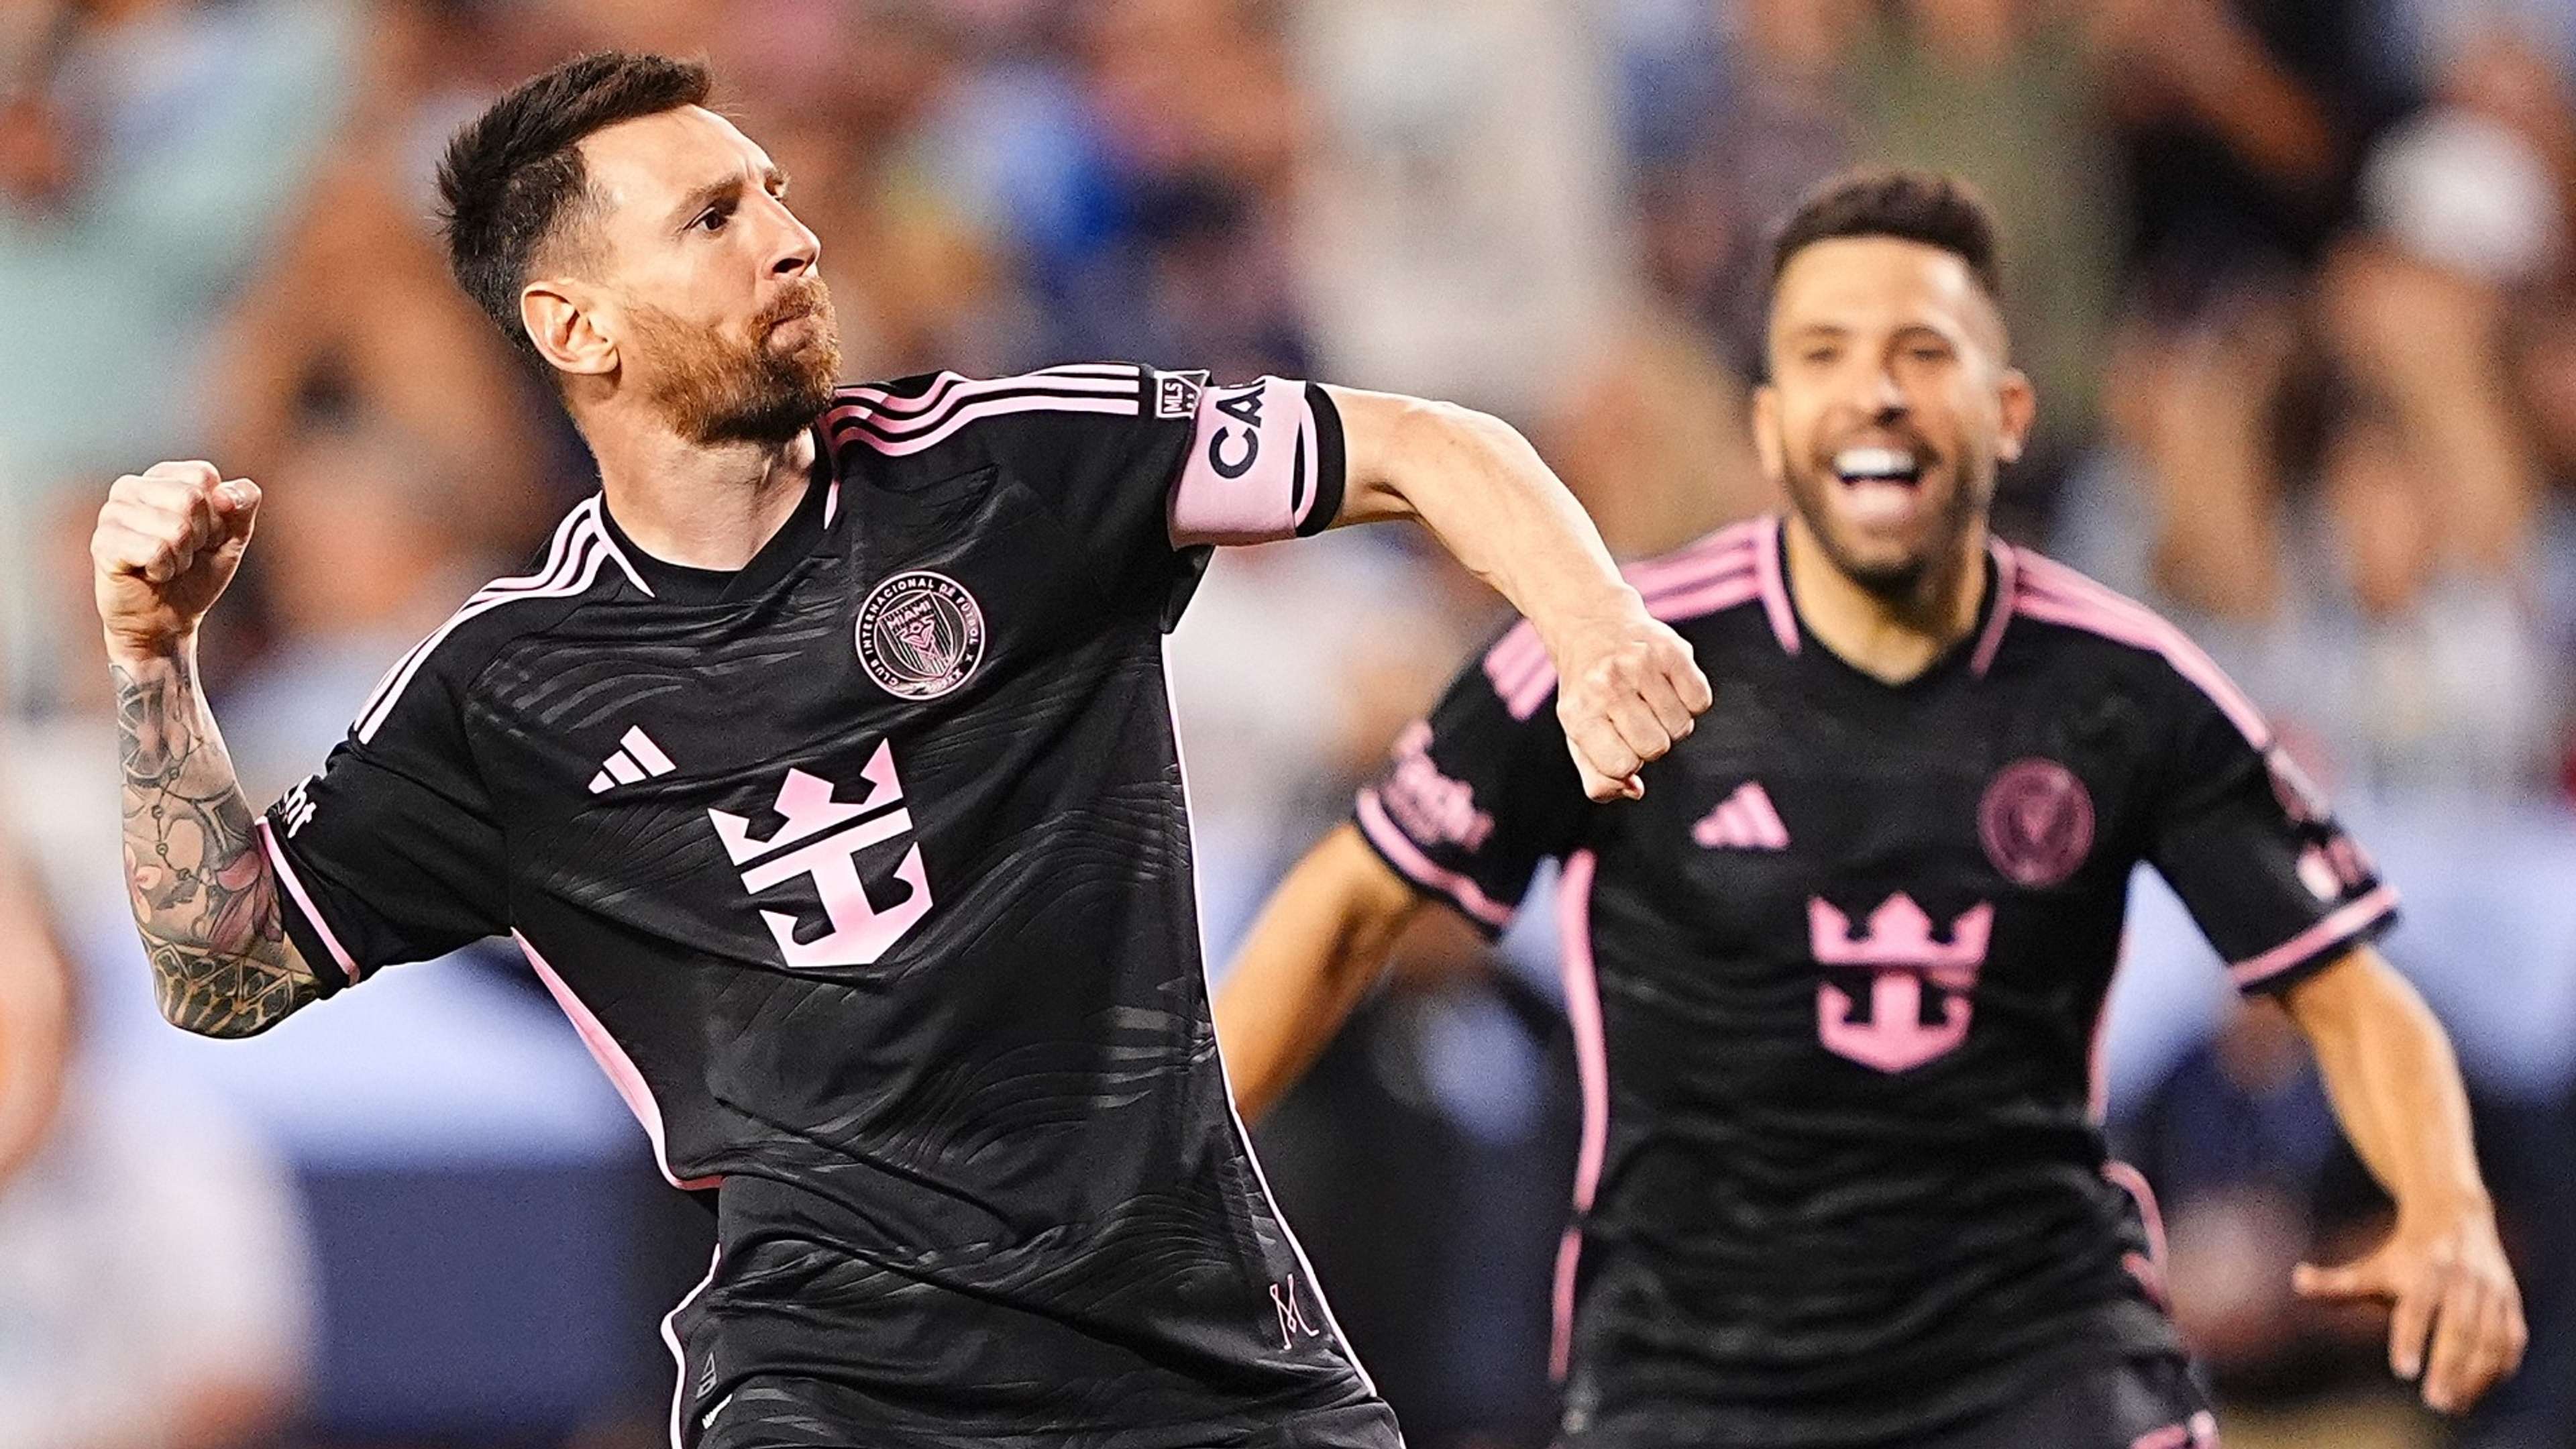 Lionel Messi wins prestigious MLS award for first time since Inter Miami  transfer after dazzling performance against Sporting Kansas City puts him  in record books alongside USMNT legend Landon Donovan & Thierry